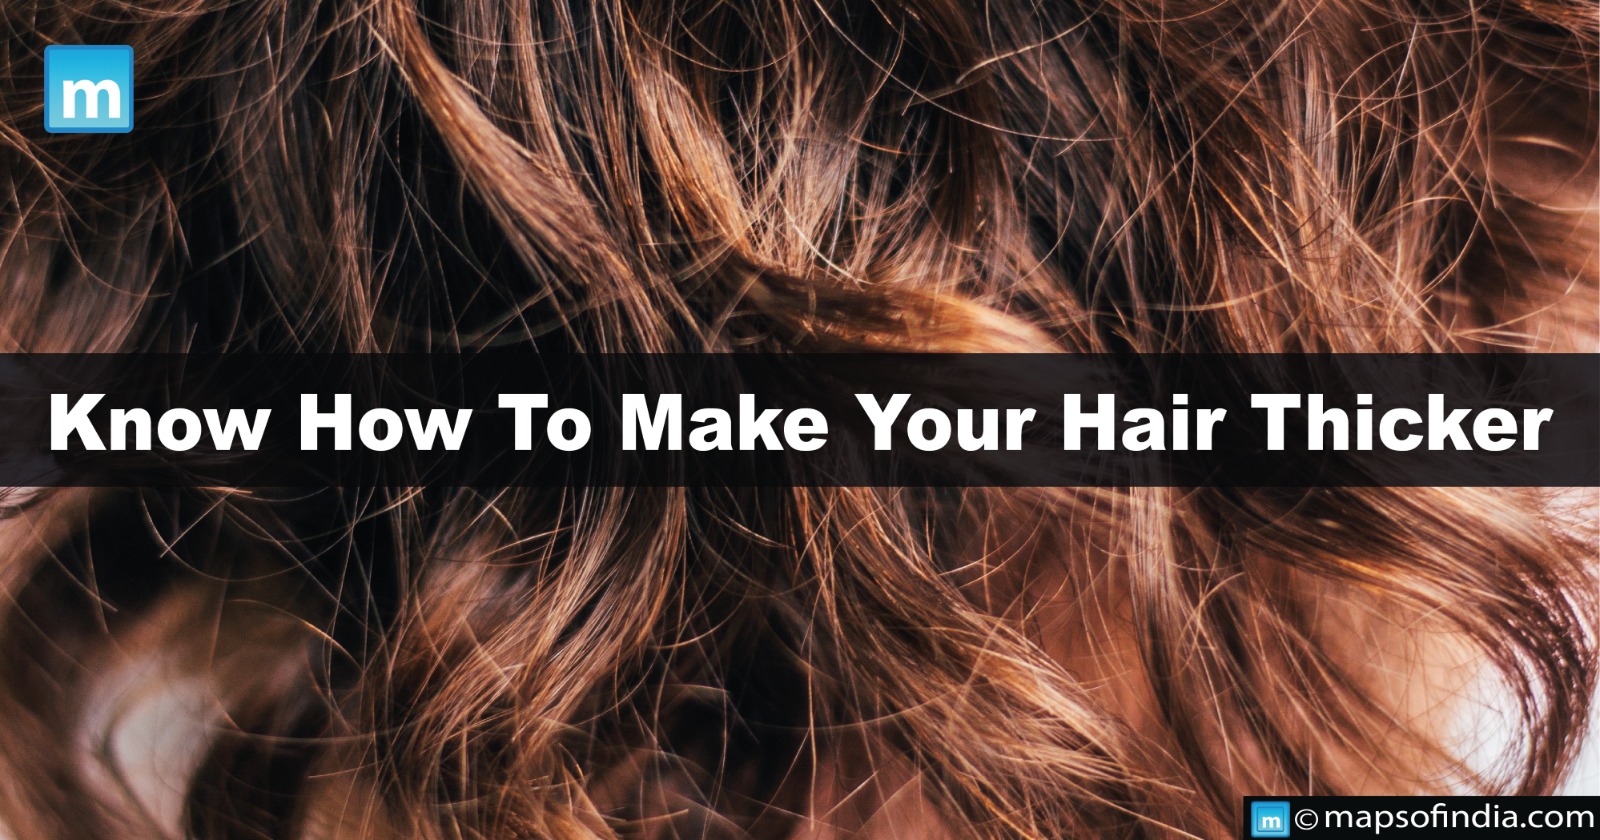 How To Get Thicker Hair? - Beauty